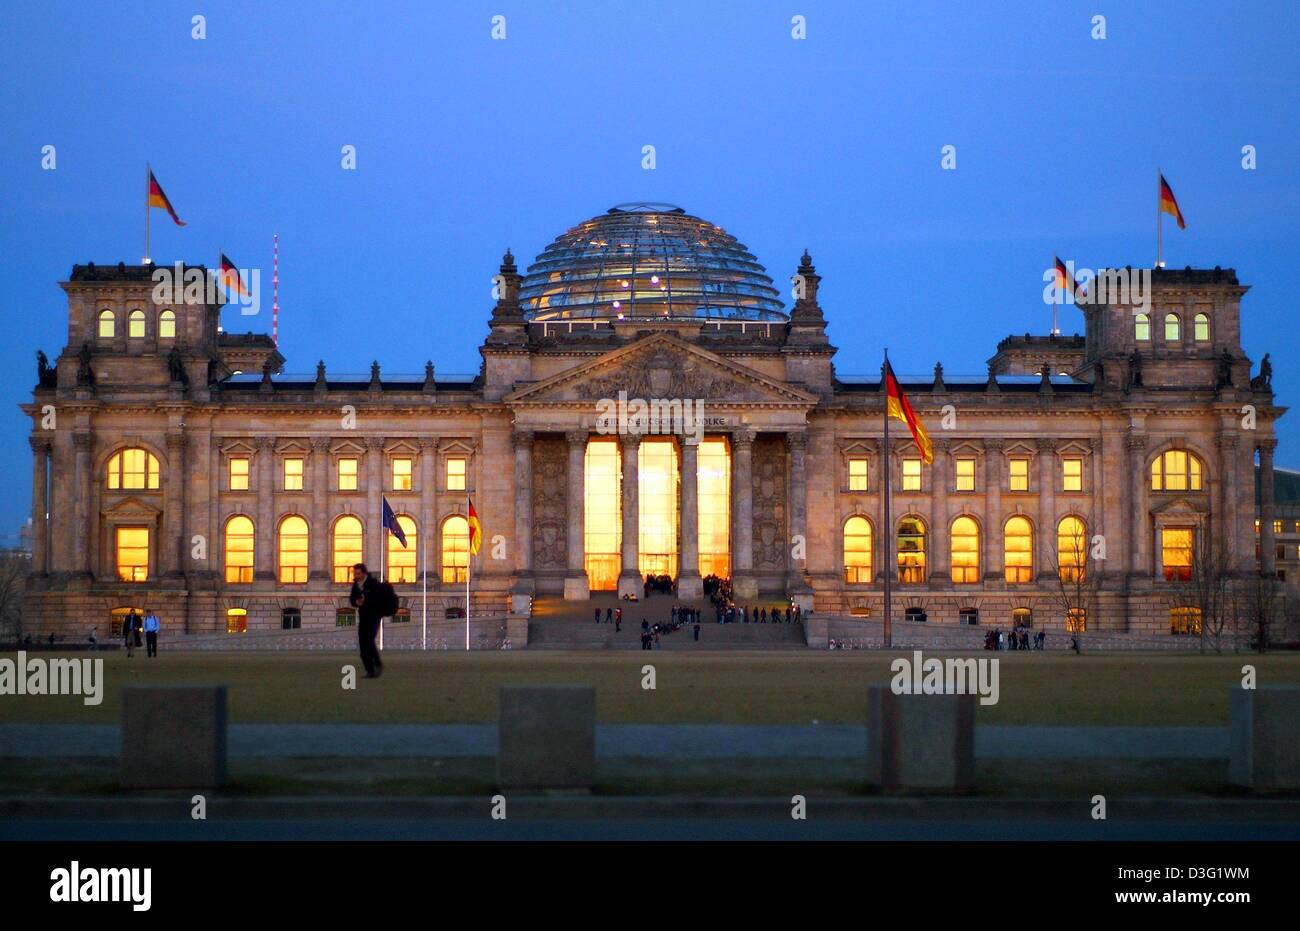 (dpa) - The red evening sun is reflected in the windows of the Reichstag building in Berlin, 18 March 2003. Built in 1894 by Paul Wallot, the Reichstag has been accommodating the Bundestag (Lower House of German Parliament) since 19 April 1999. The Italian High Renaissance style building has a changeful history: On 9 November 1918, the German Republic was proclaimed here. Shortly a Stock Photo